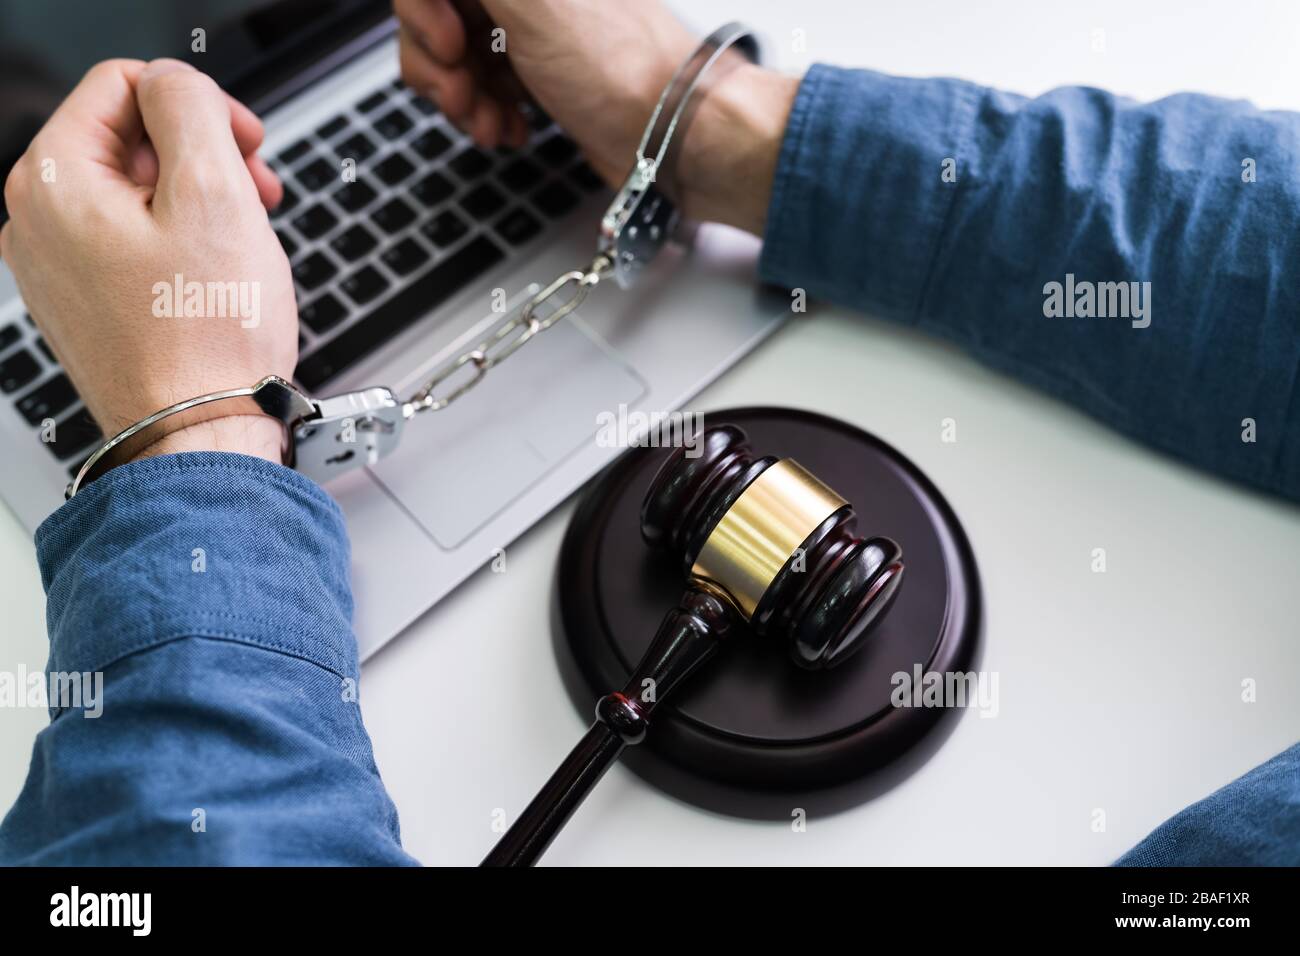 Online Security And Cyber Crime Law And Legal Action Stock Photo